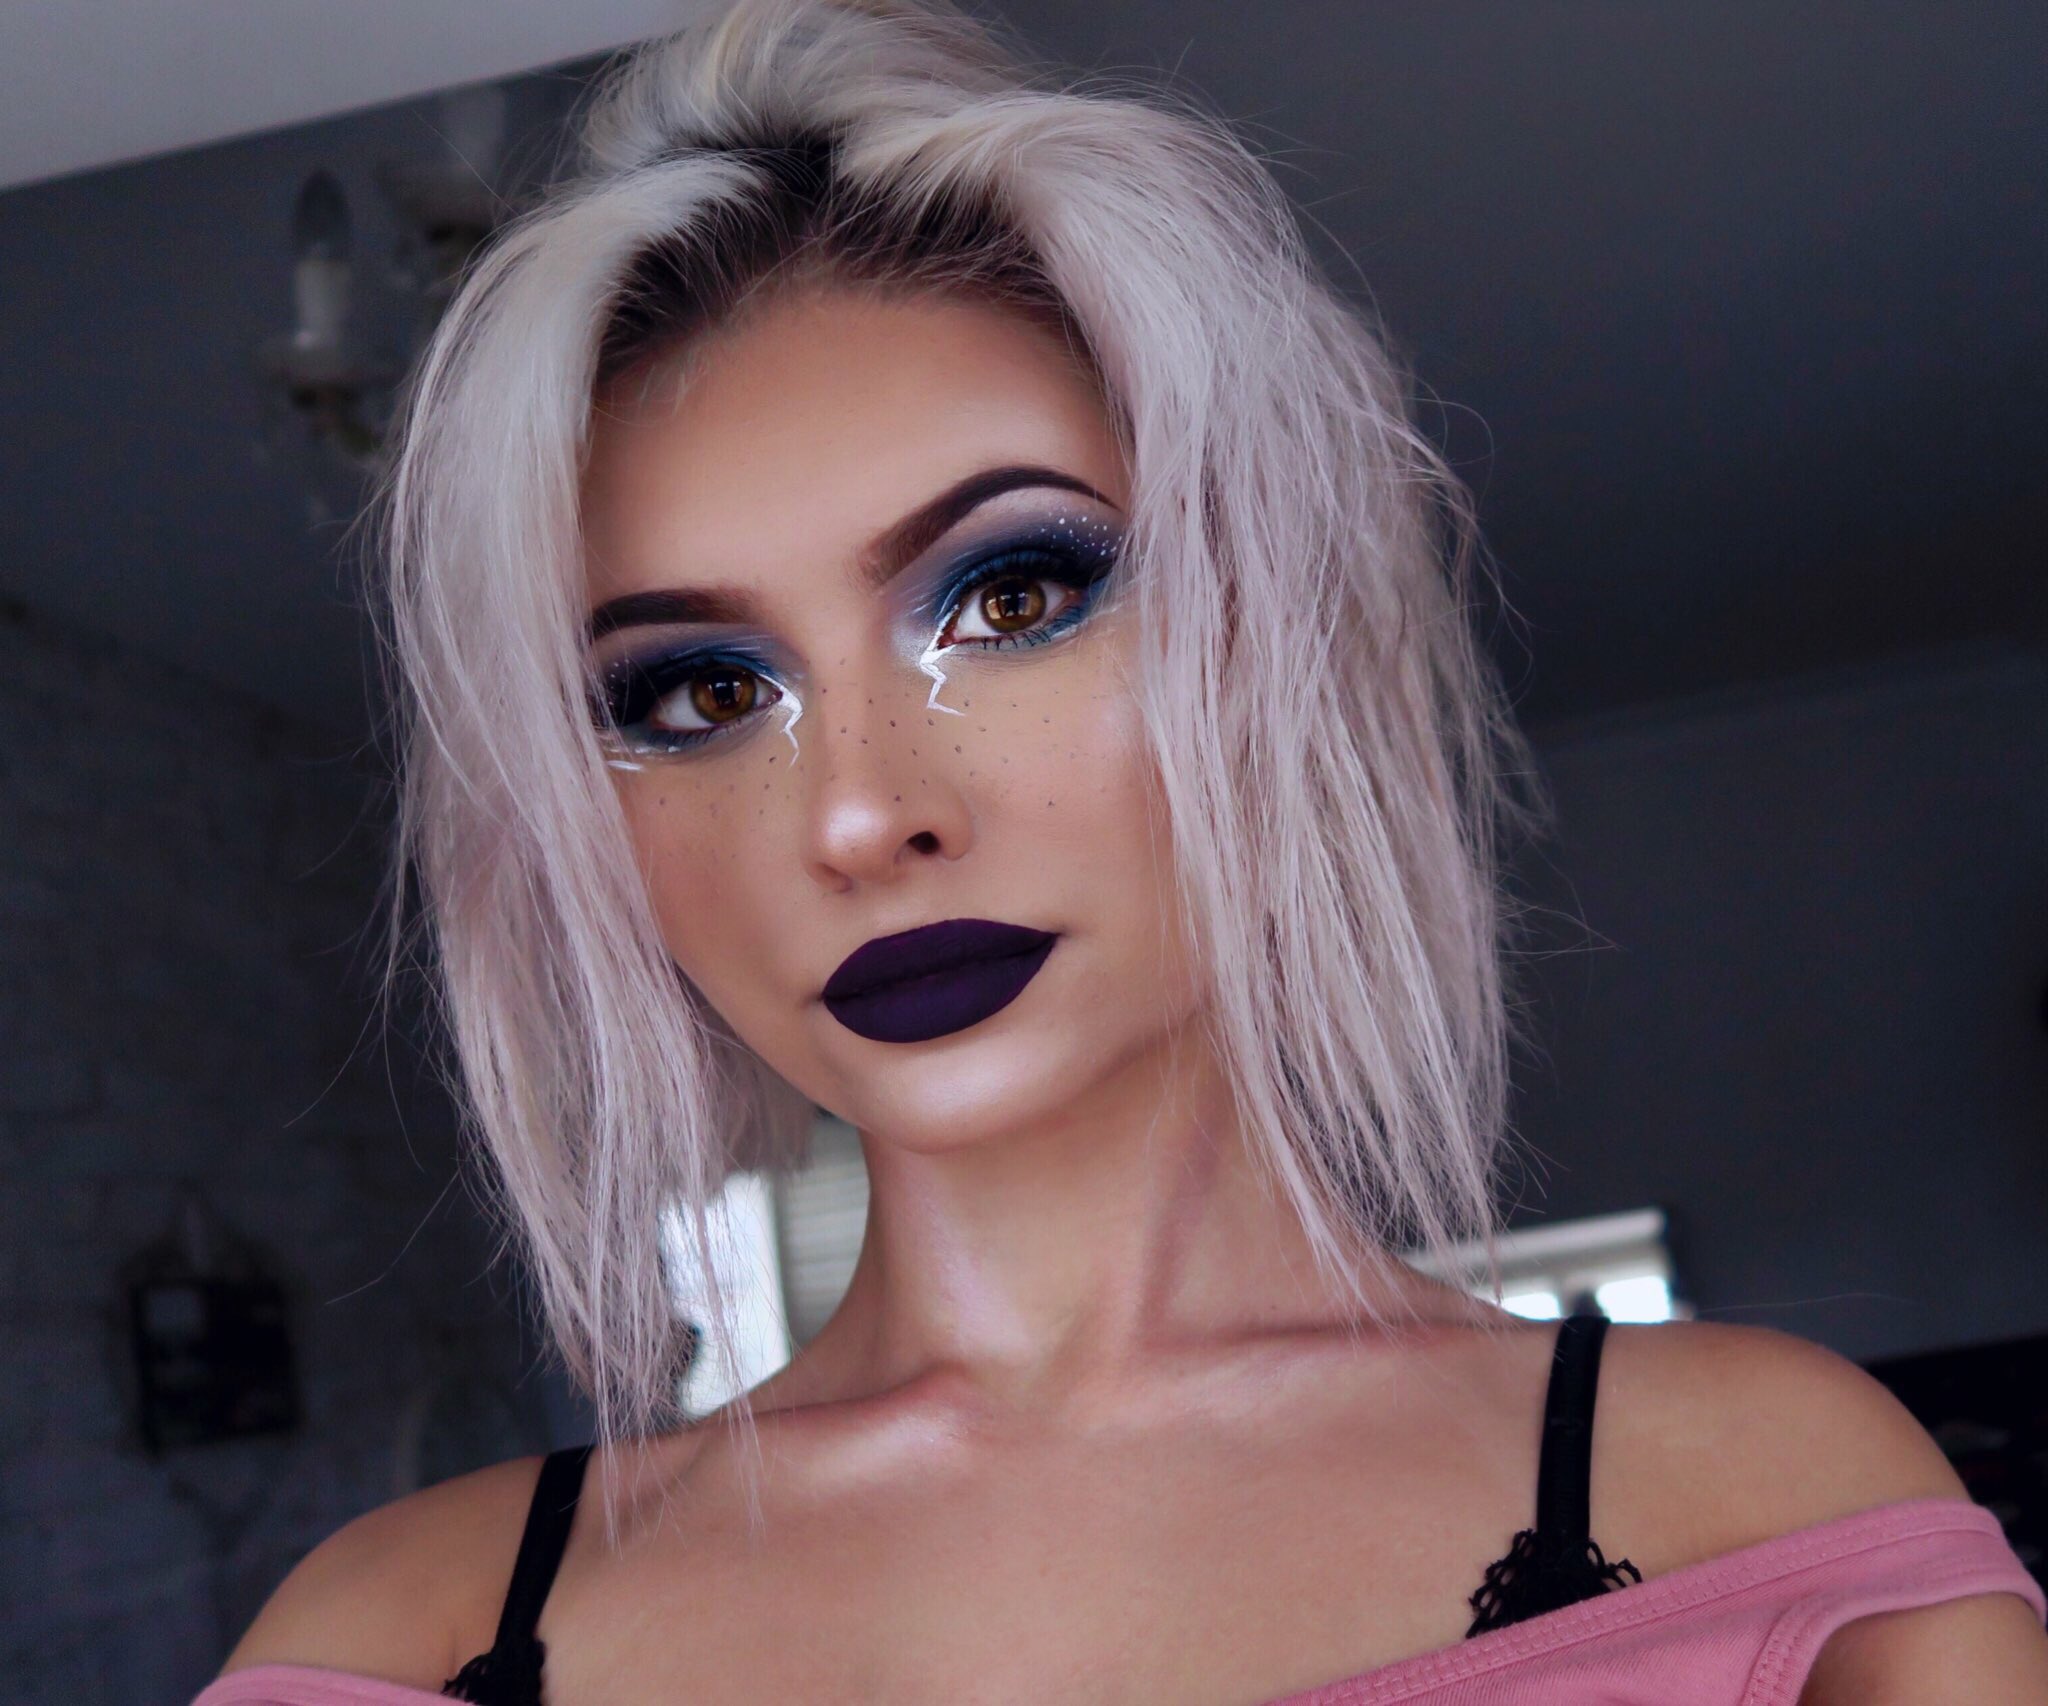 Talia Mar On Twitter Storm Through 🌌🌌 Collab With Isabellekategm 💫